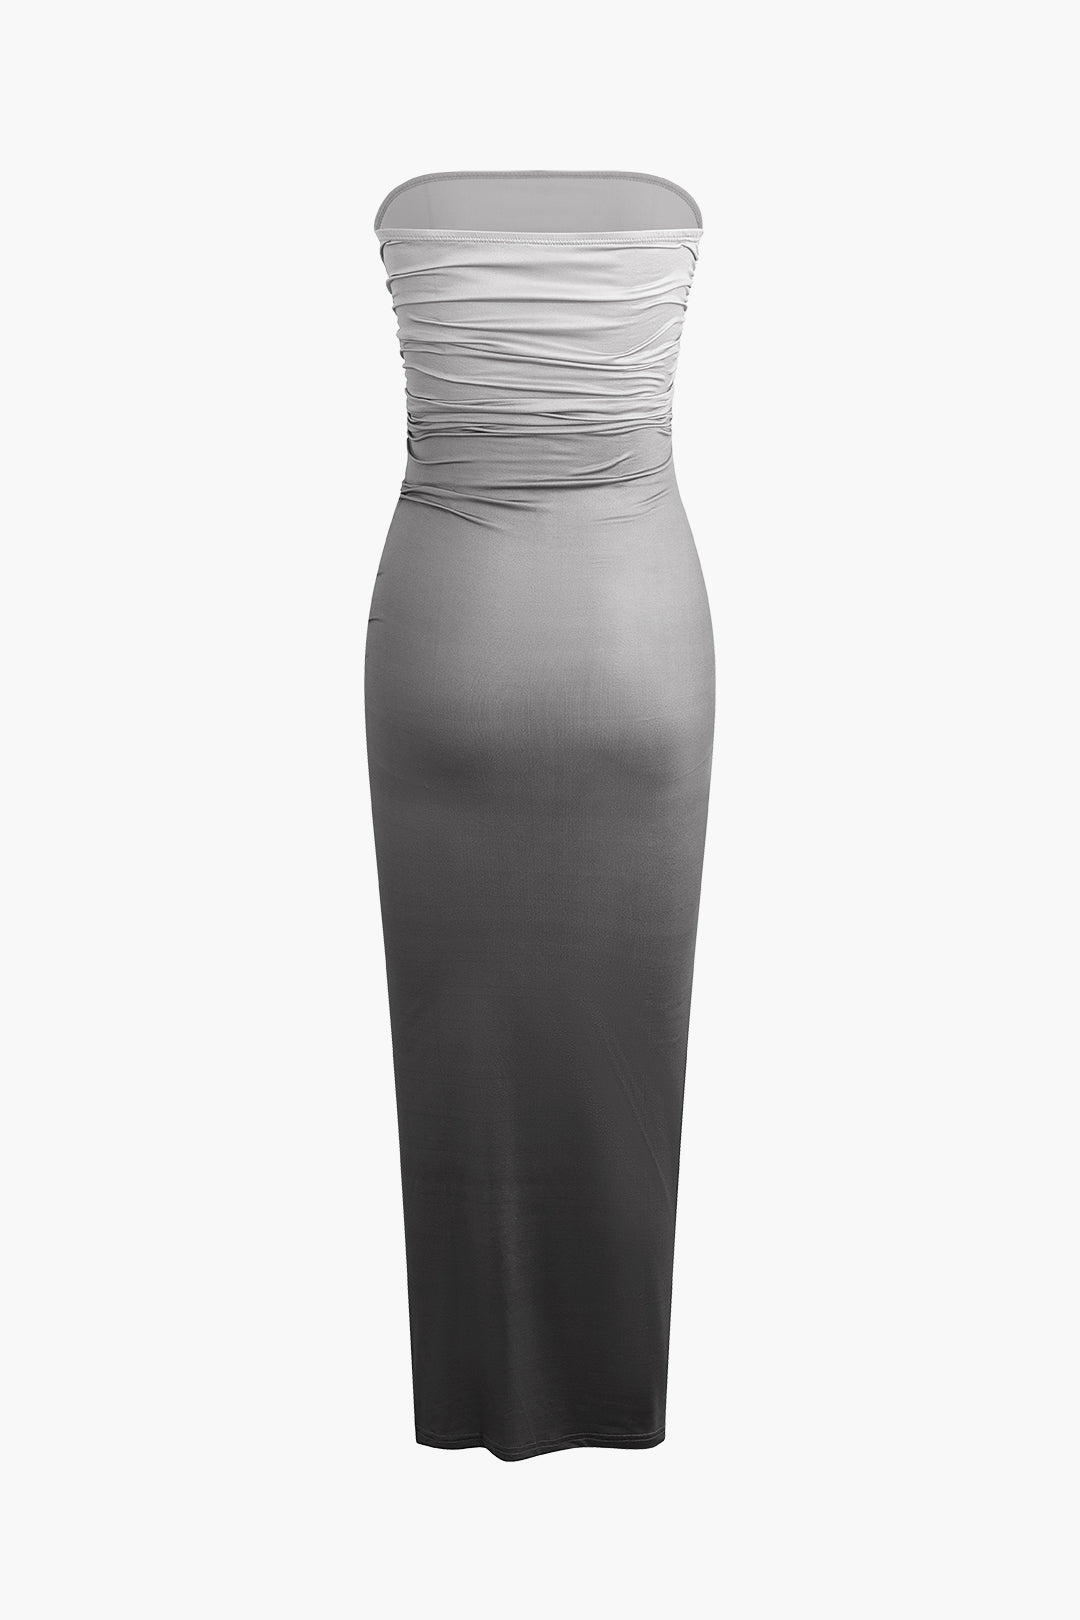 Ombre Ruched Strapless Midi Dress